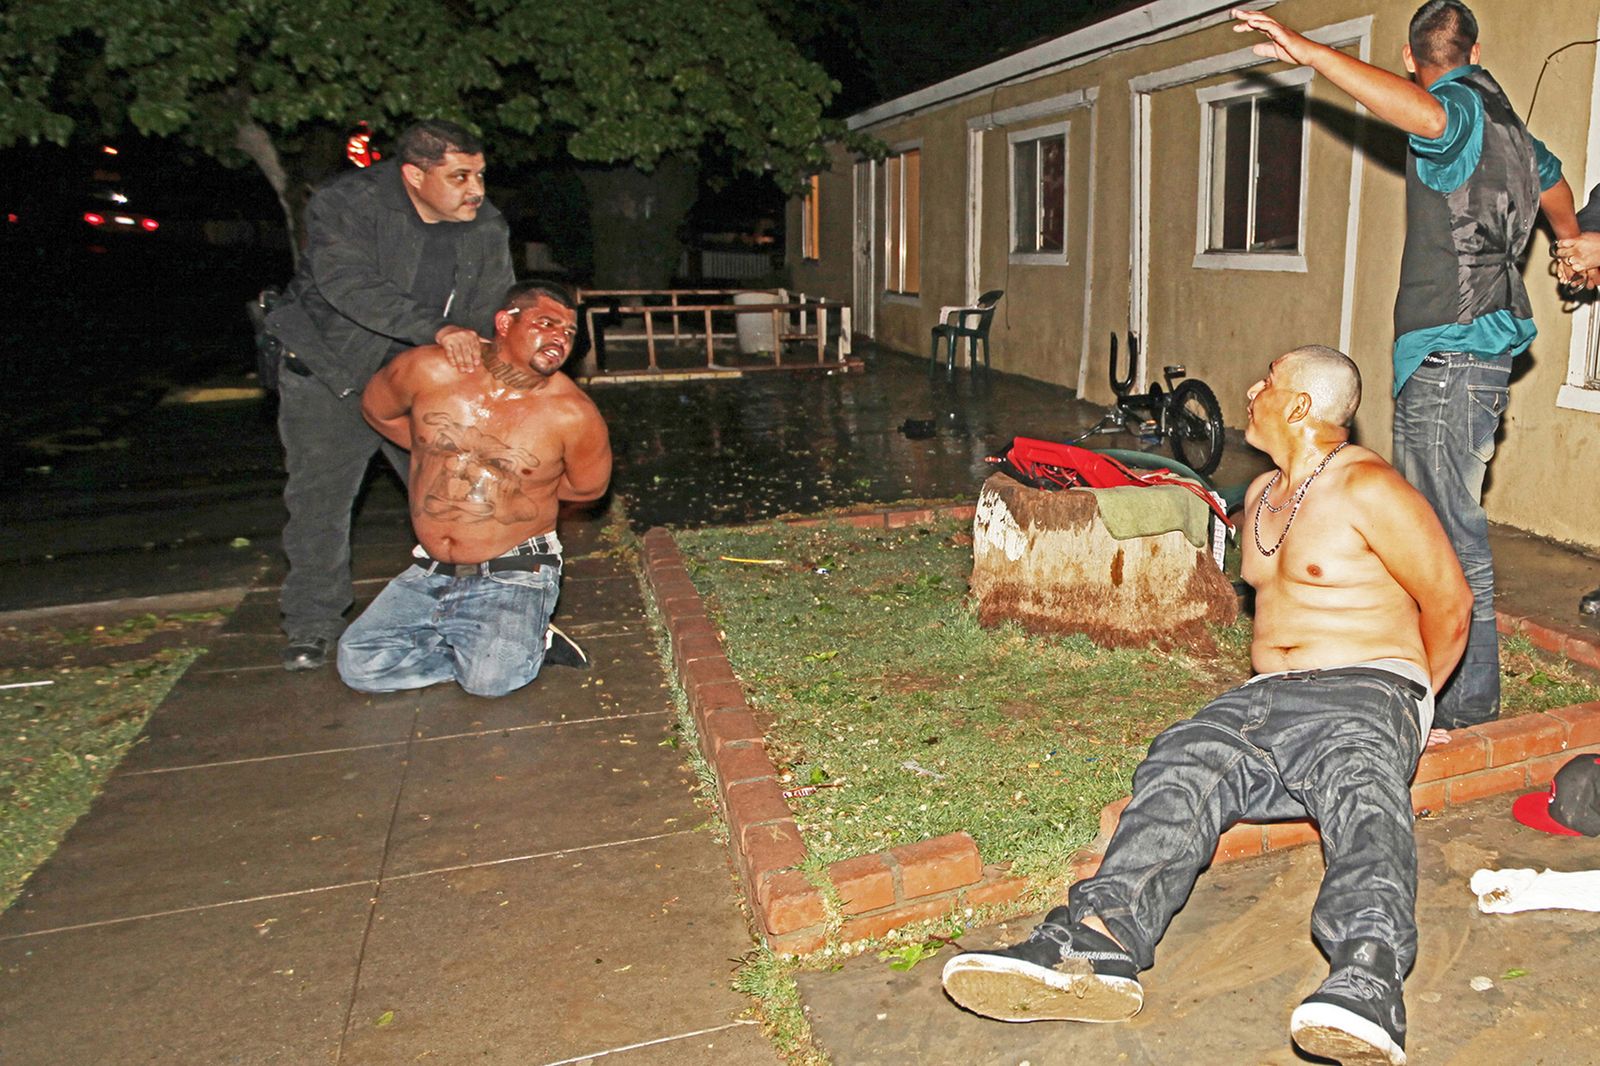 © Richard Street - Officers David Goday and Jose Arsiga wrestle with Bulldog gang members following a riot in the Sonora bar.